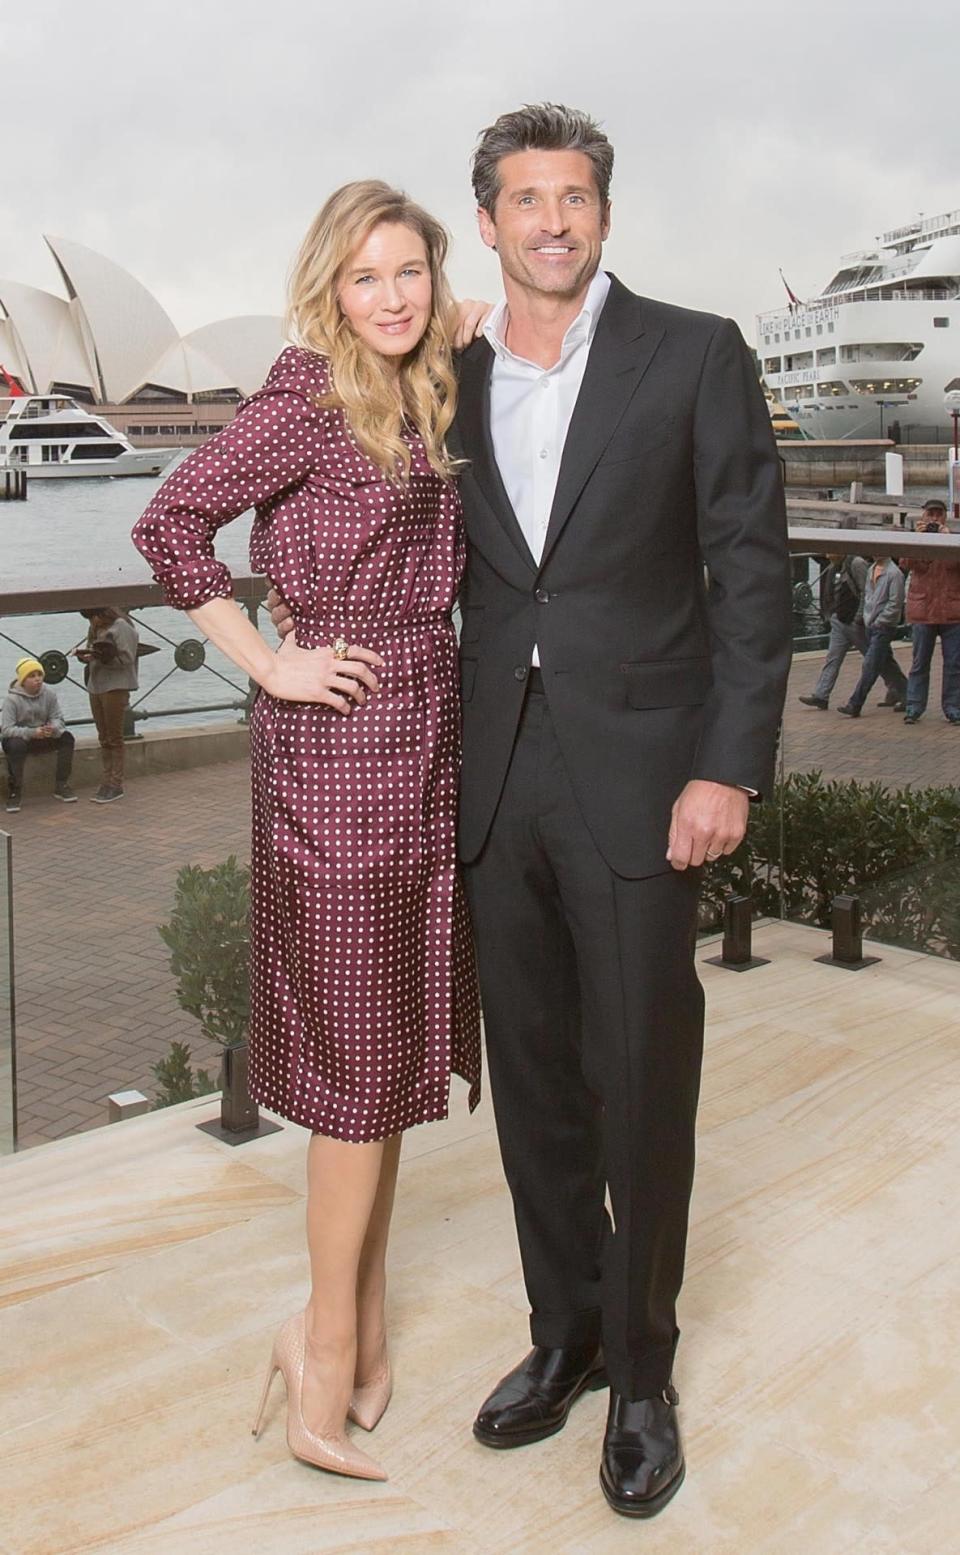 <p>Renée donned a beautifully elegant silk polka dot dress while promoting ‘Bridget Jones’ Baby’ with her co-star Patrick Dempsey in Sydney. <i>[Photo: Getty]</i></p>